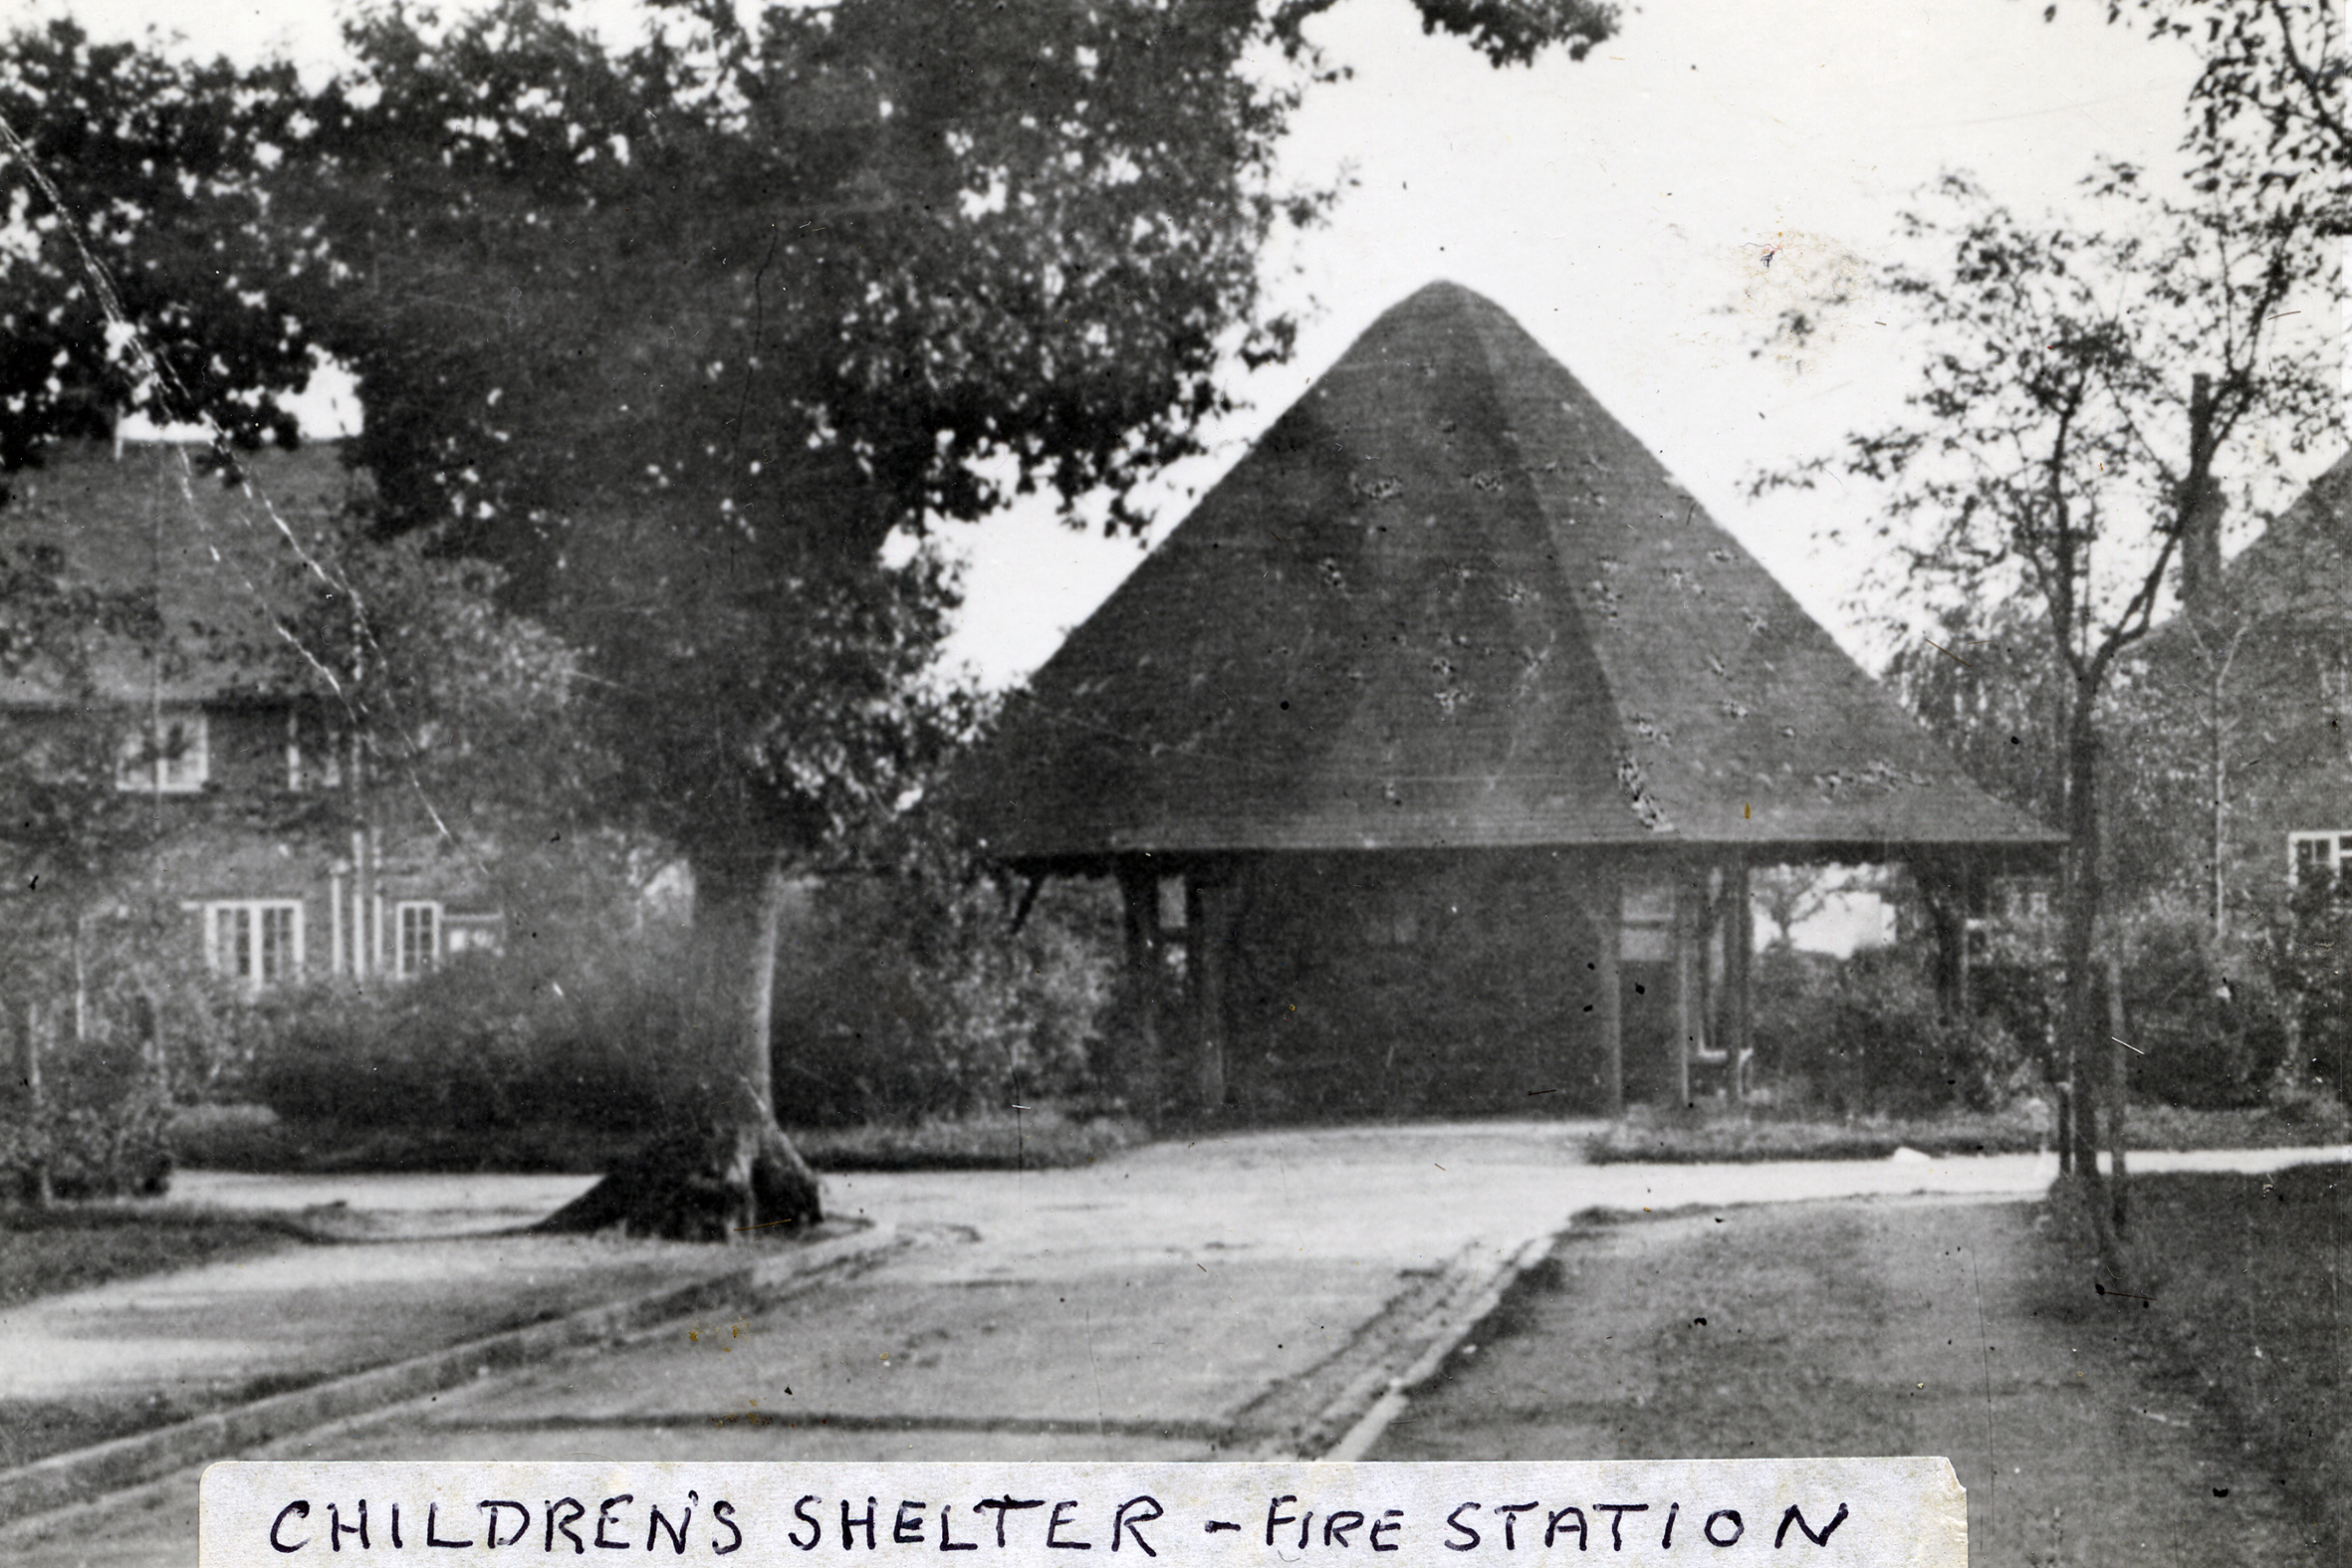  Children's Shelter and Fire Station 